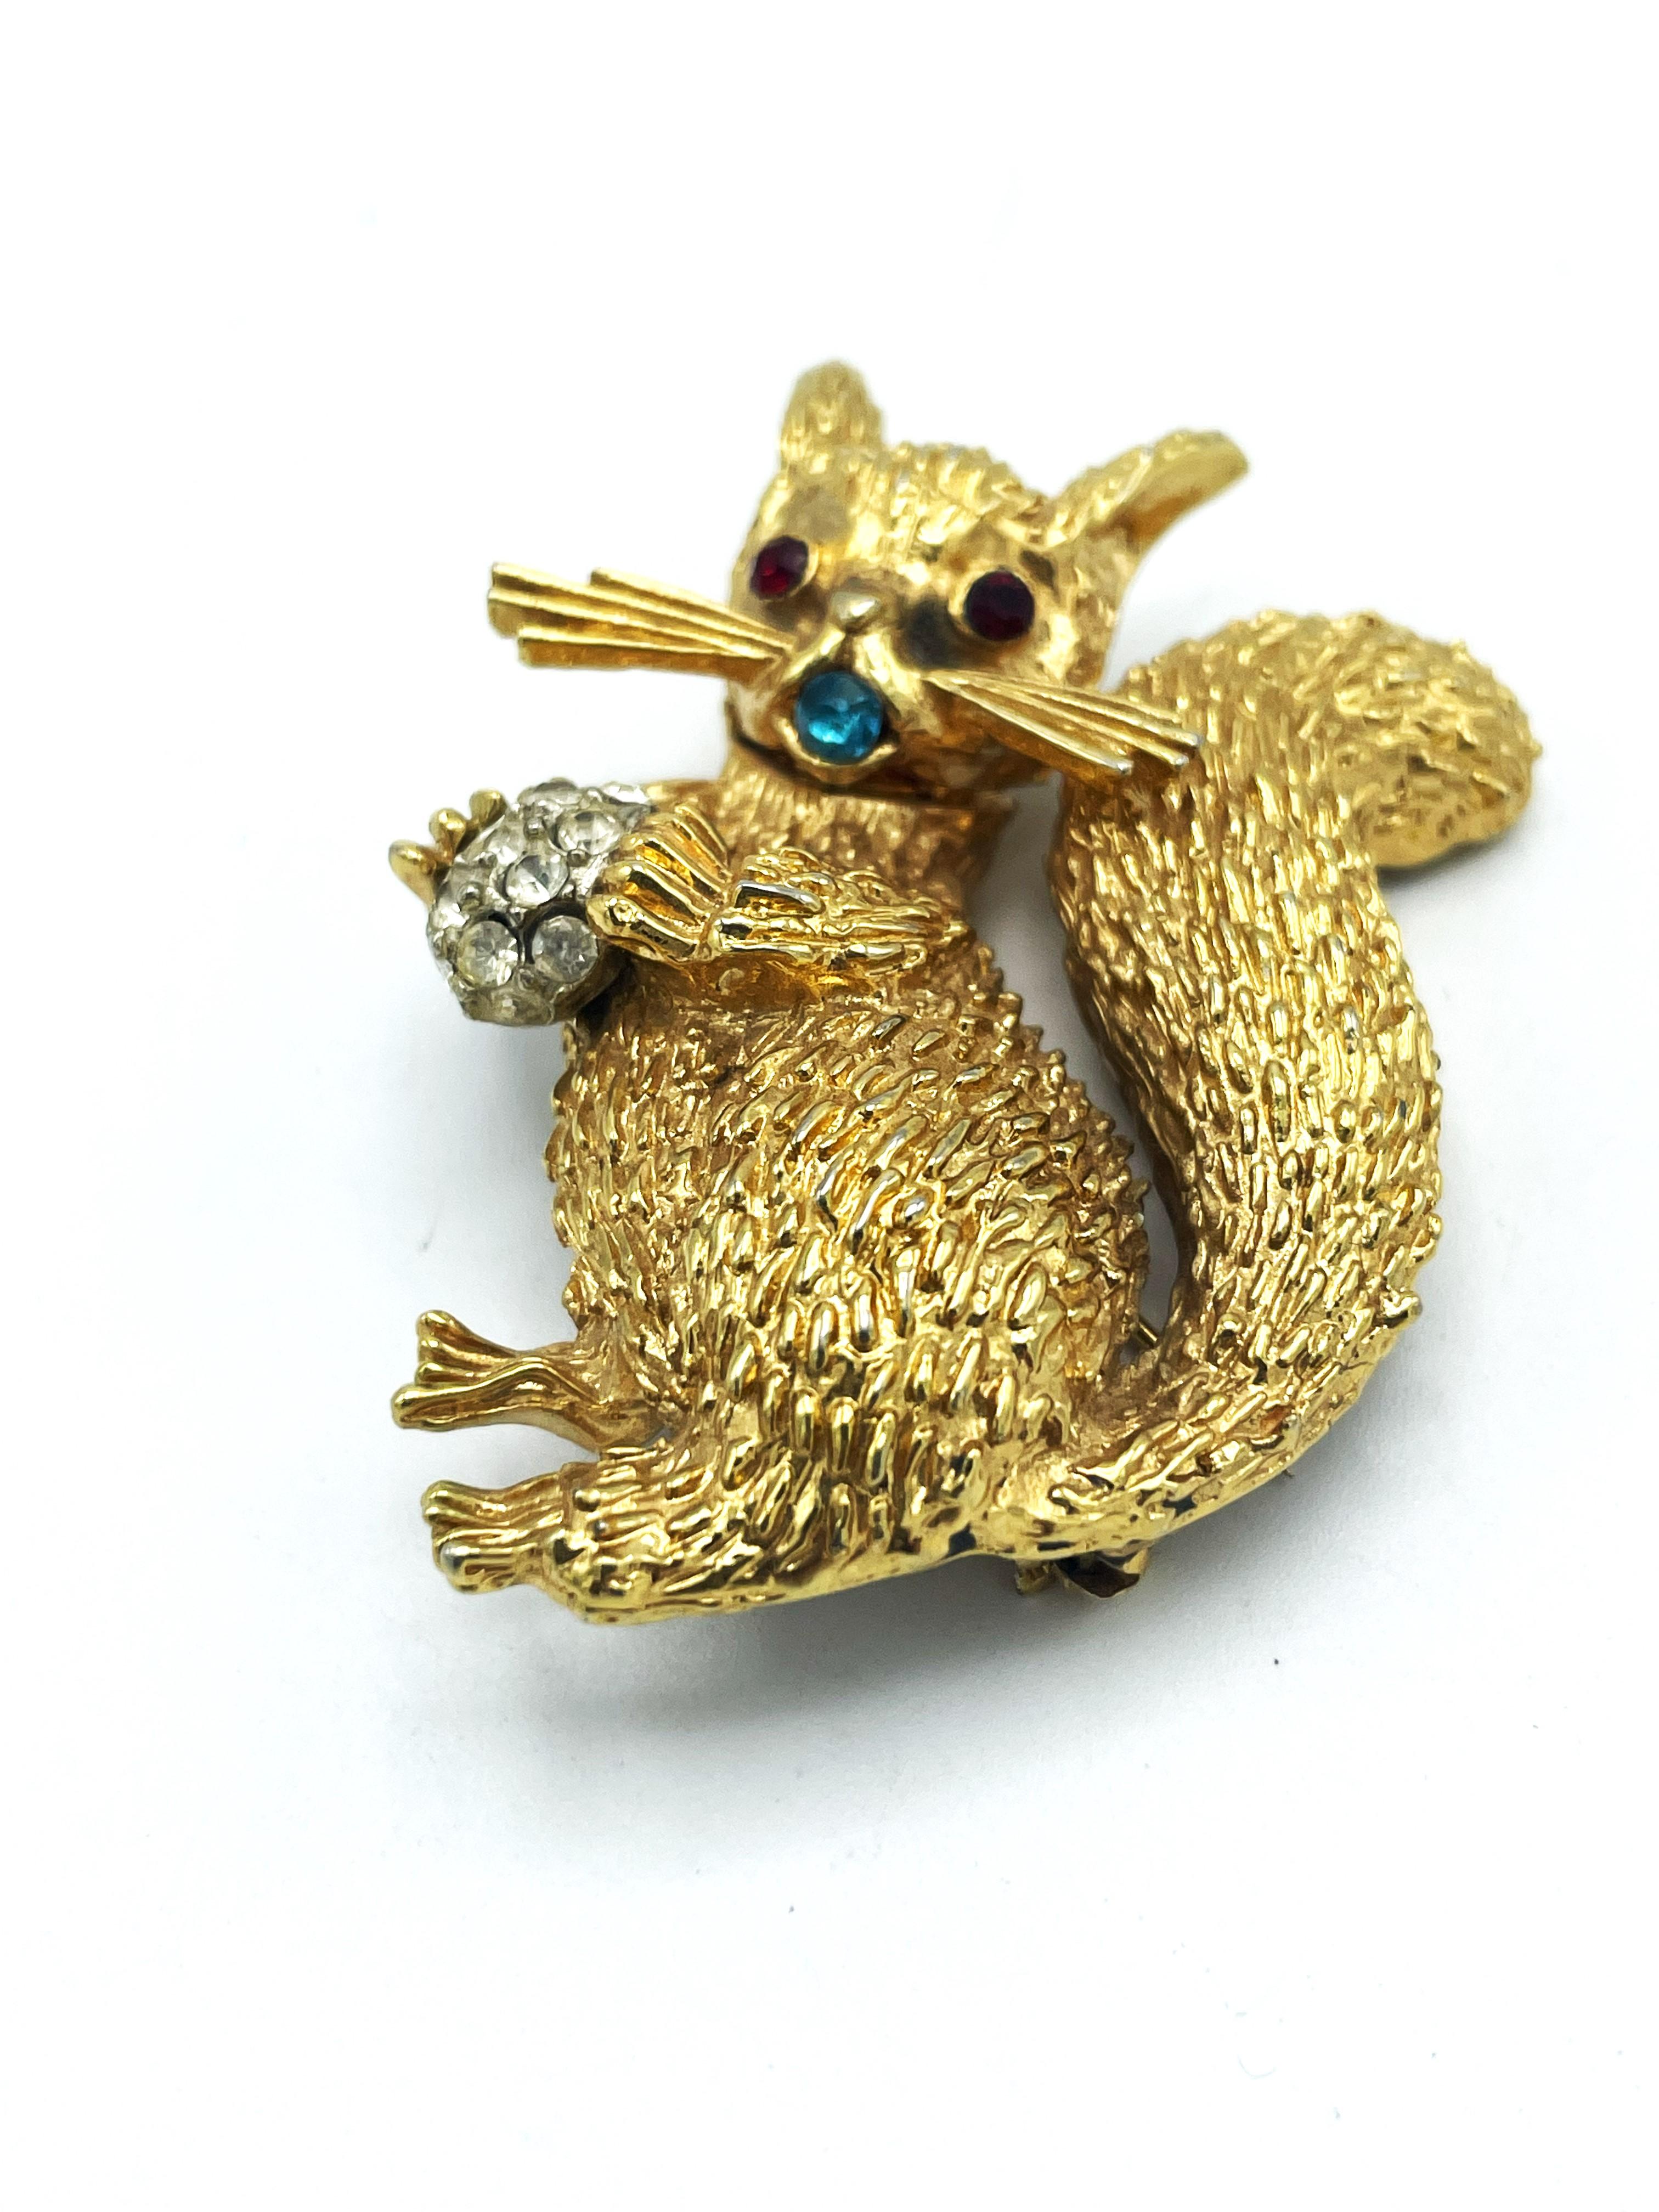 A loving squirrel sitting with a rhinestone nut, red rhinestone eyes, a beard and open mouth with aqua rhinestones. Signed ART USA 1950s

Dimensions
Hight 6 cm, Width 4 cm, Deep 1,5 cm 
Vey good condition